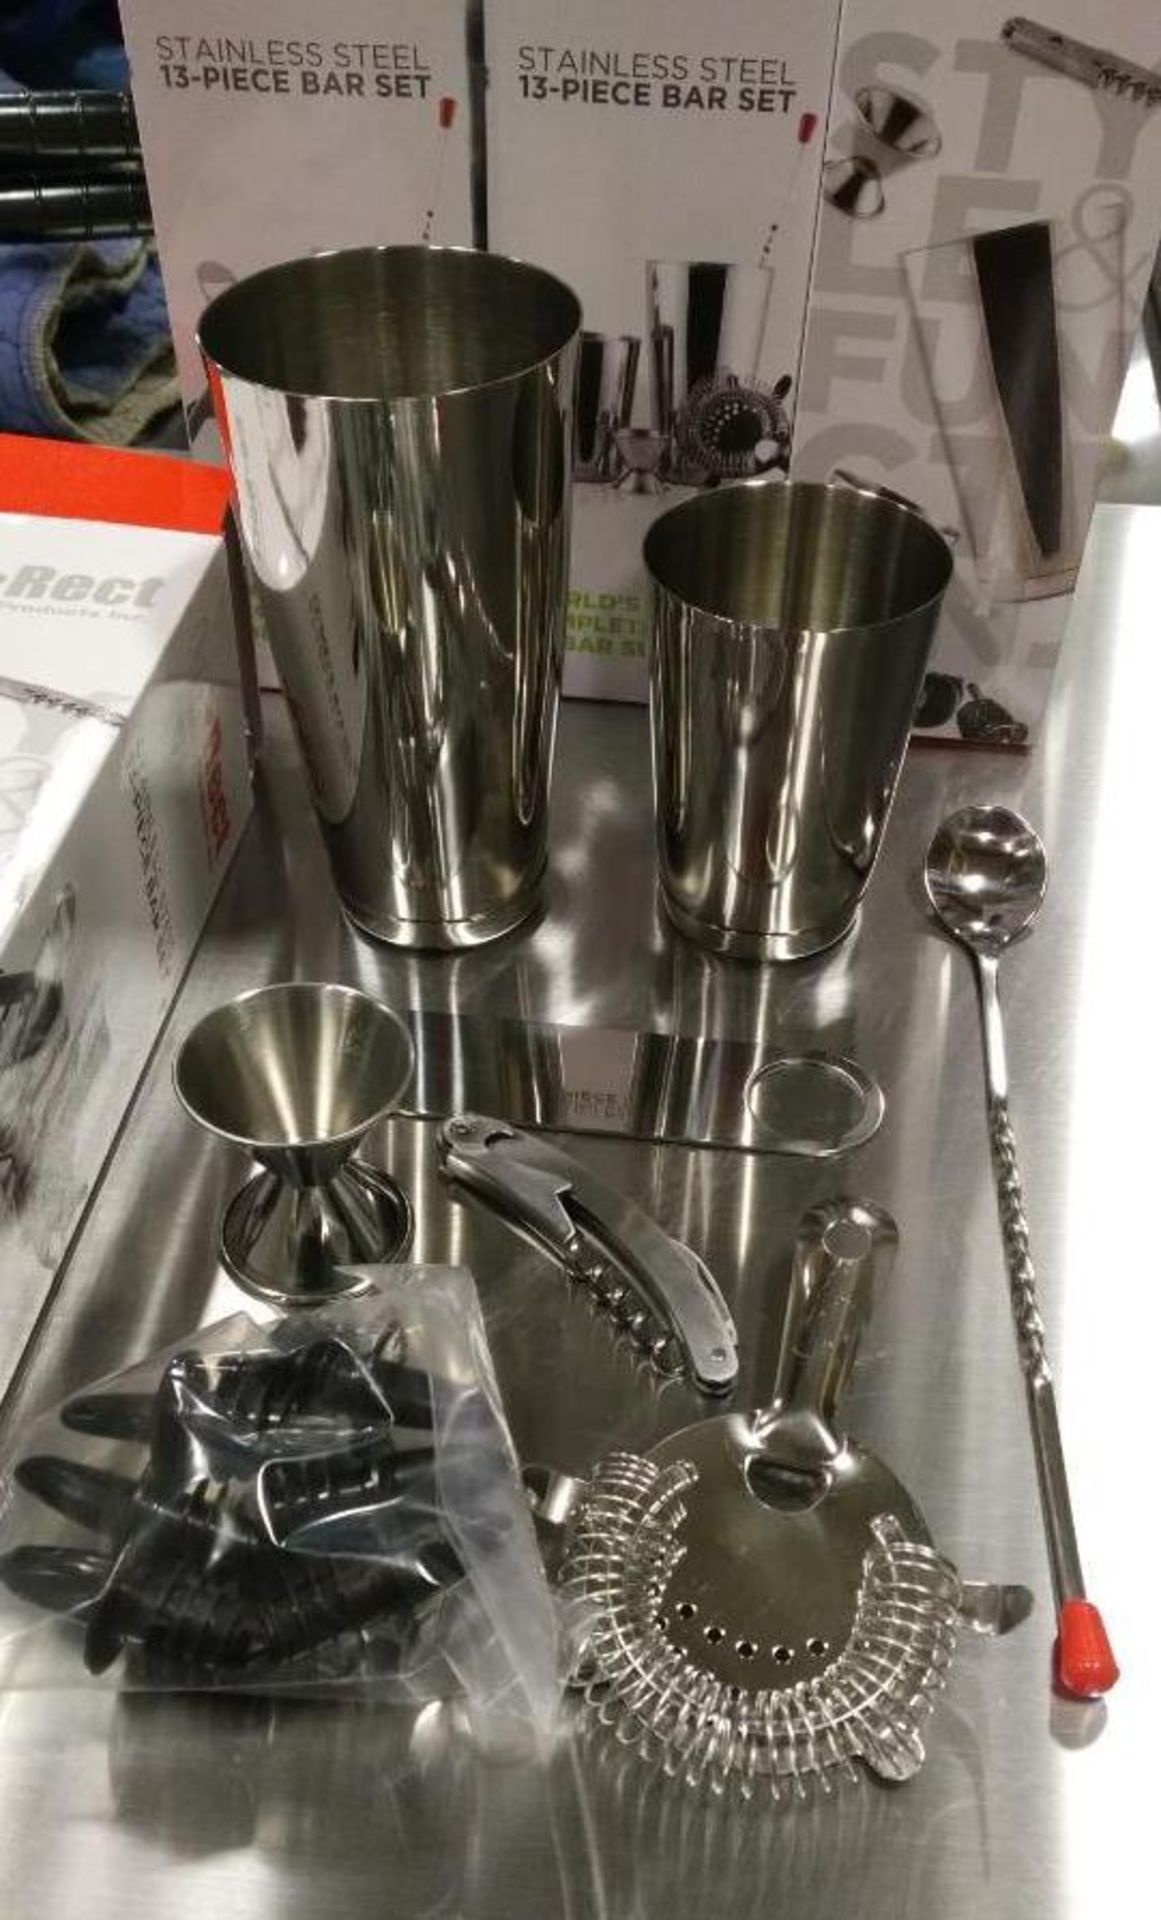 13 PIECE STAINLESS STEEL HOME BAR STARTER SET, CO-RECT BS207 - NEW - Image 2 of 6